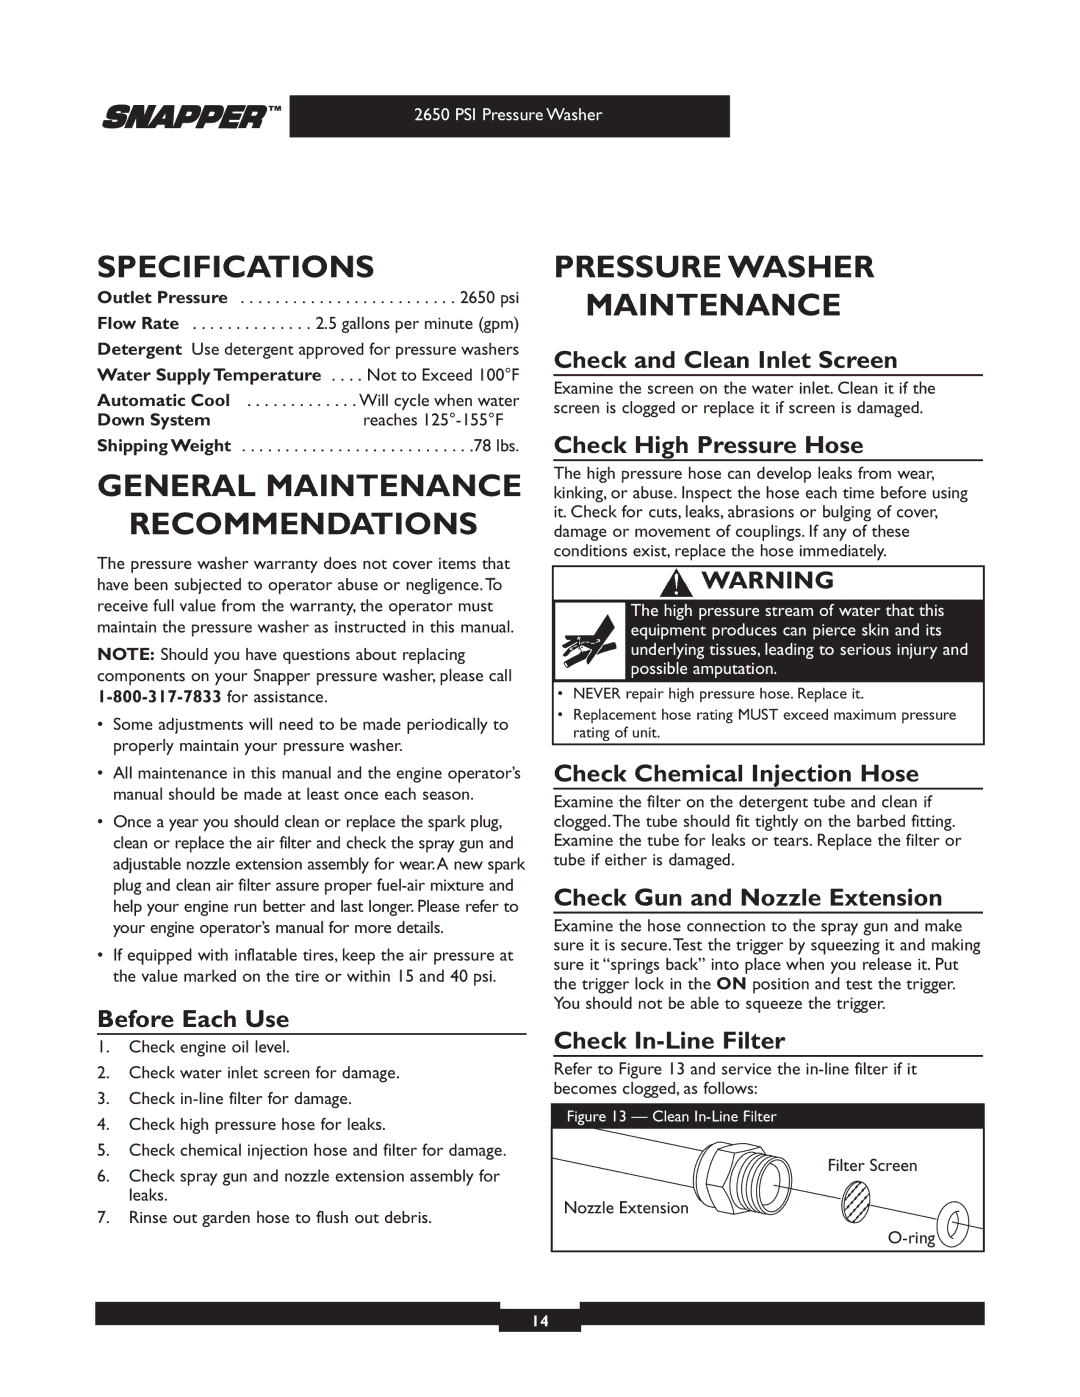 Briggs & Stratton 2650 PSI manual Specifications, General Maintenance Recommendations, Pressure Washer Maintenance 